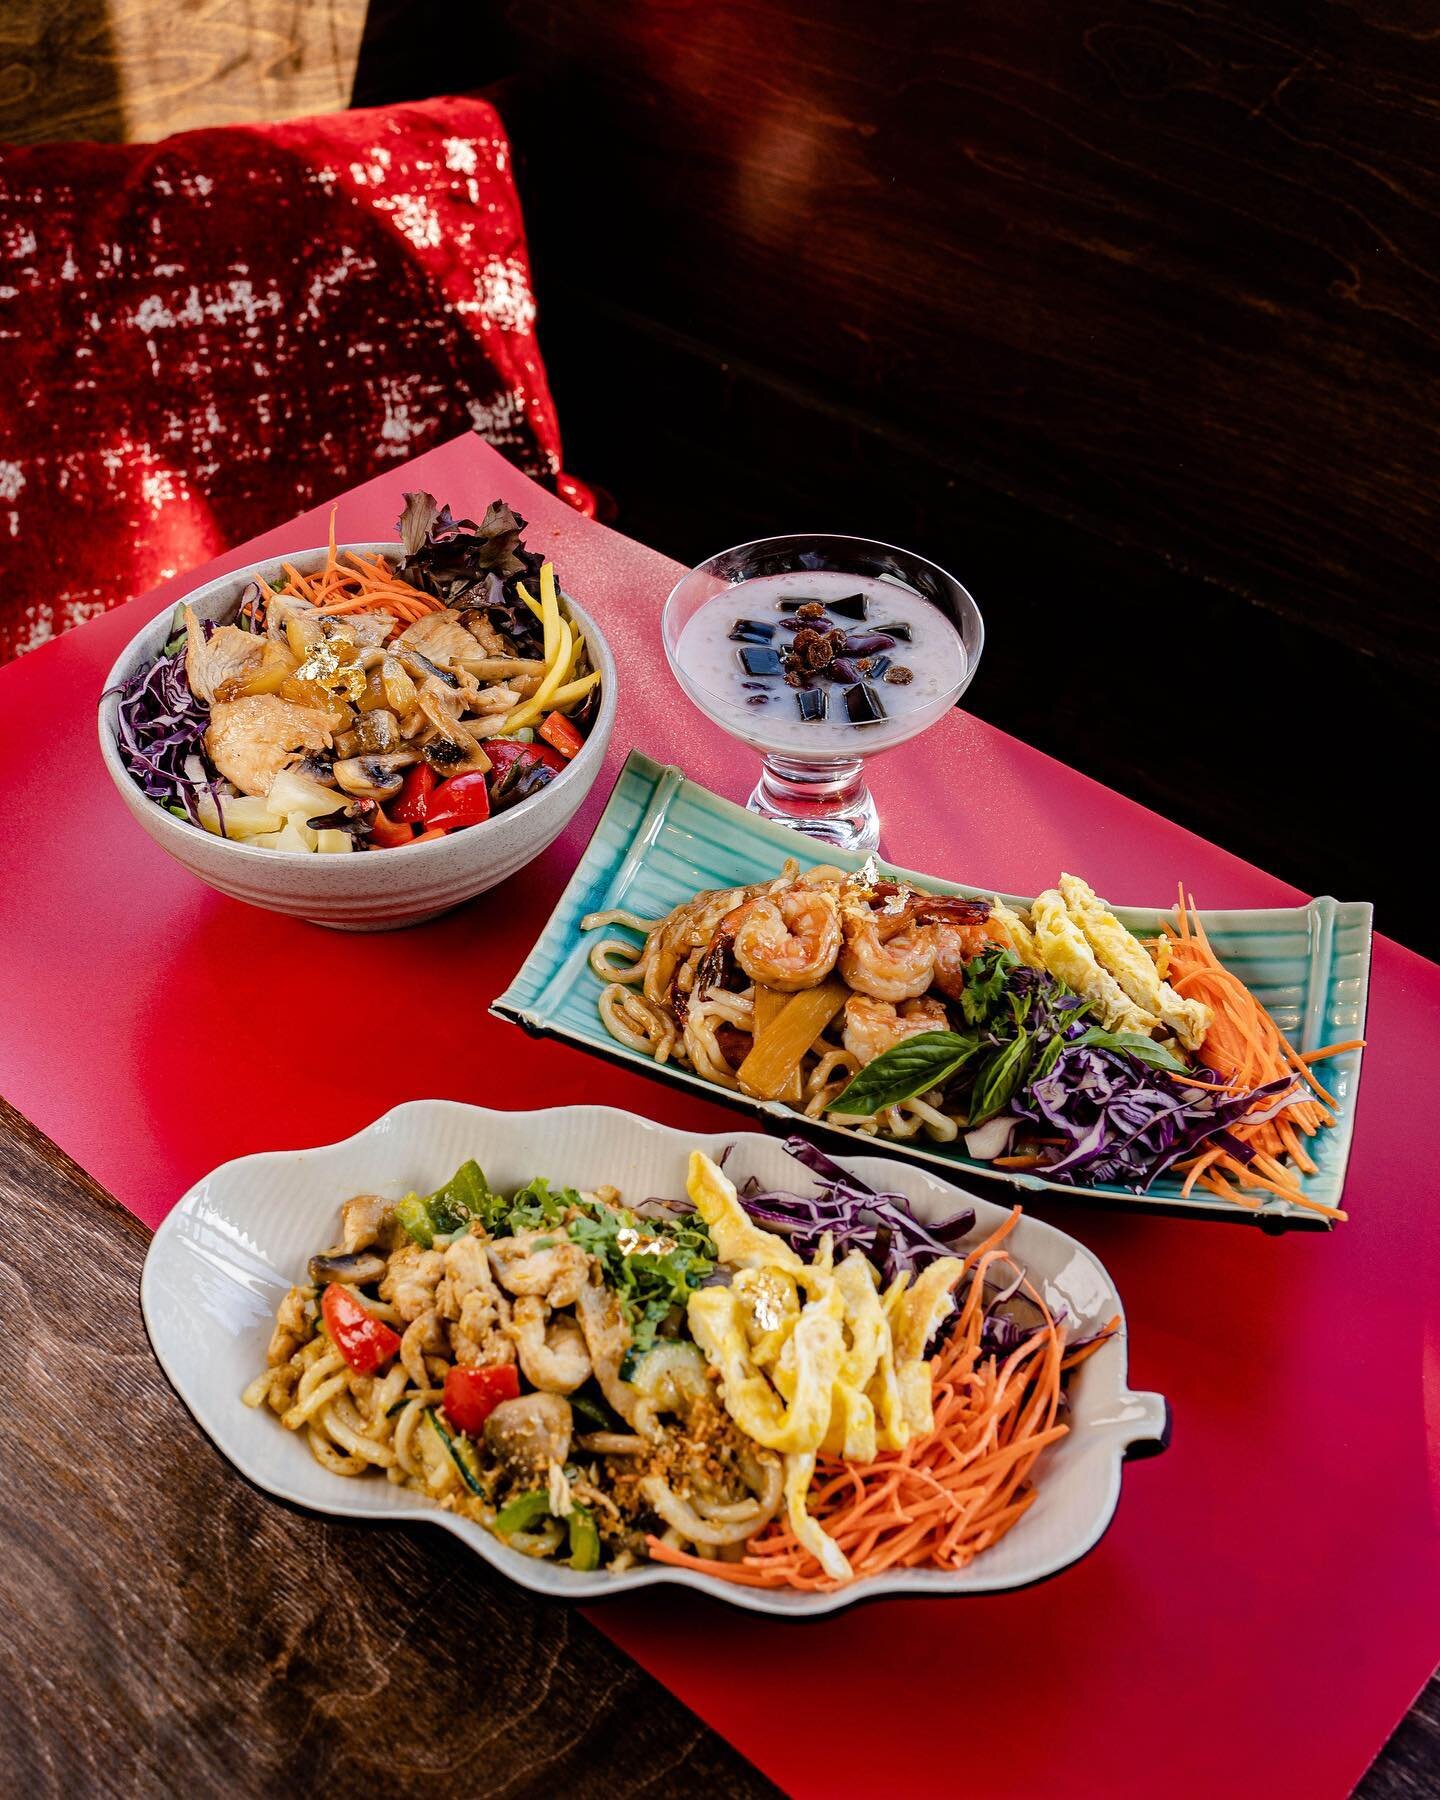 Sabai dee mai? Chilly day isn&rsquo;t it? No worry, we gotchu! Come and dine in with us for some hot and steamy plates that will warm your soul 🥰👐
.
.
.
.
.
#shushuthai #shushumontreal #thaifood #mtlthaifood #mtlmoments #mtlfoodie #mtlfood #mtlblog